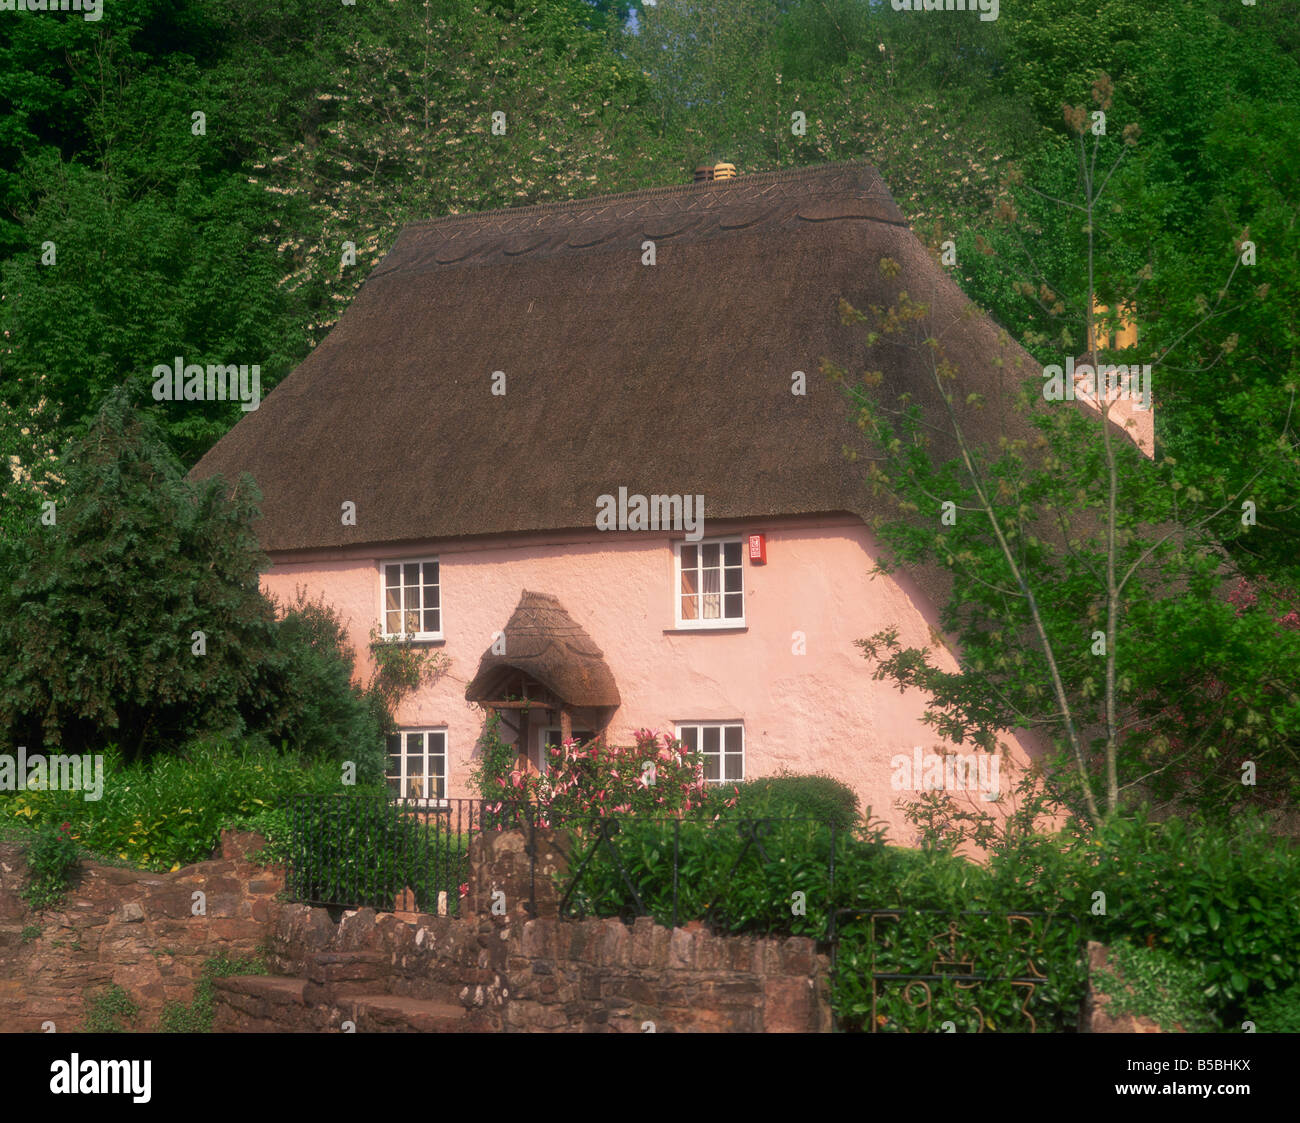 Pink washed thatched cottage at Widecombe near Torquay Devon England United Kingdom Europe Stock Photo